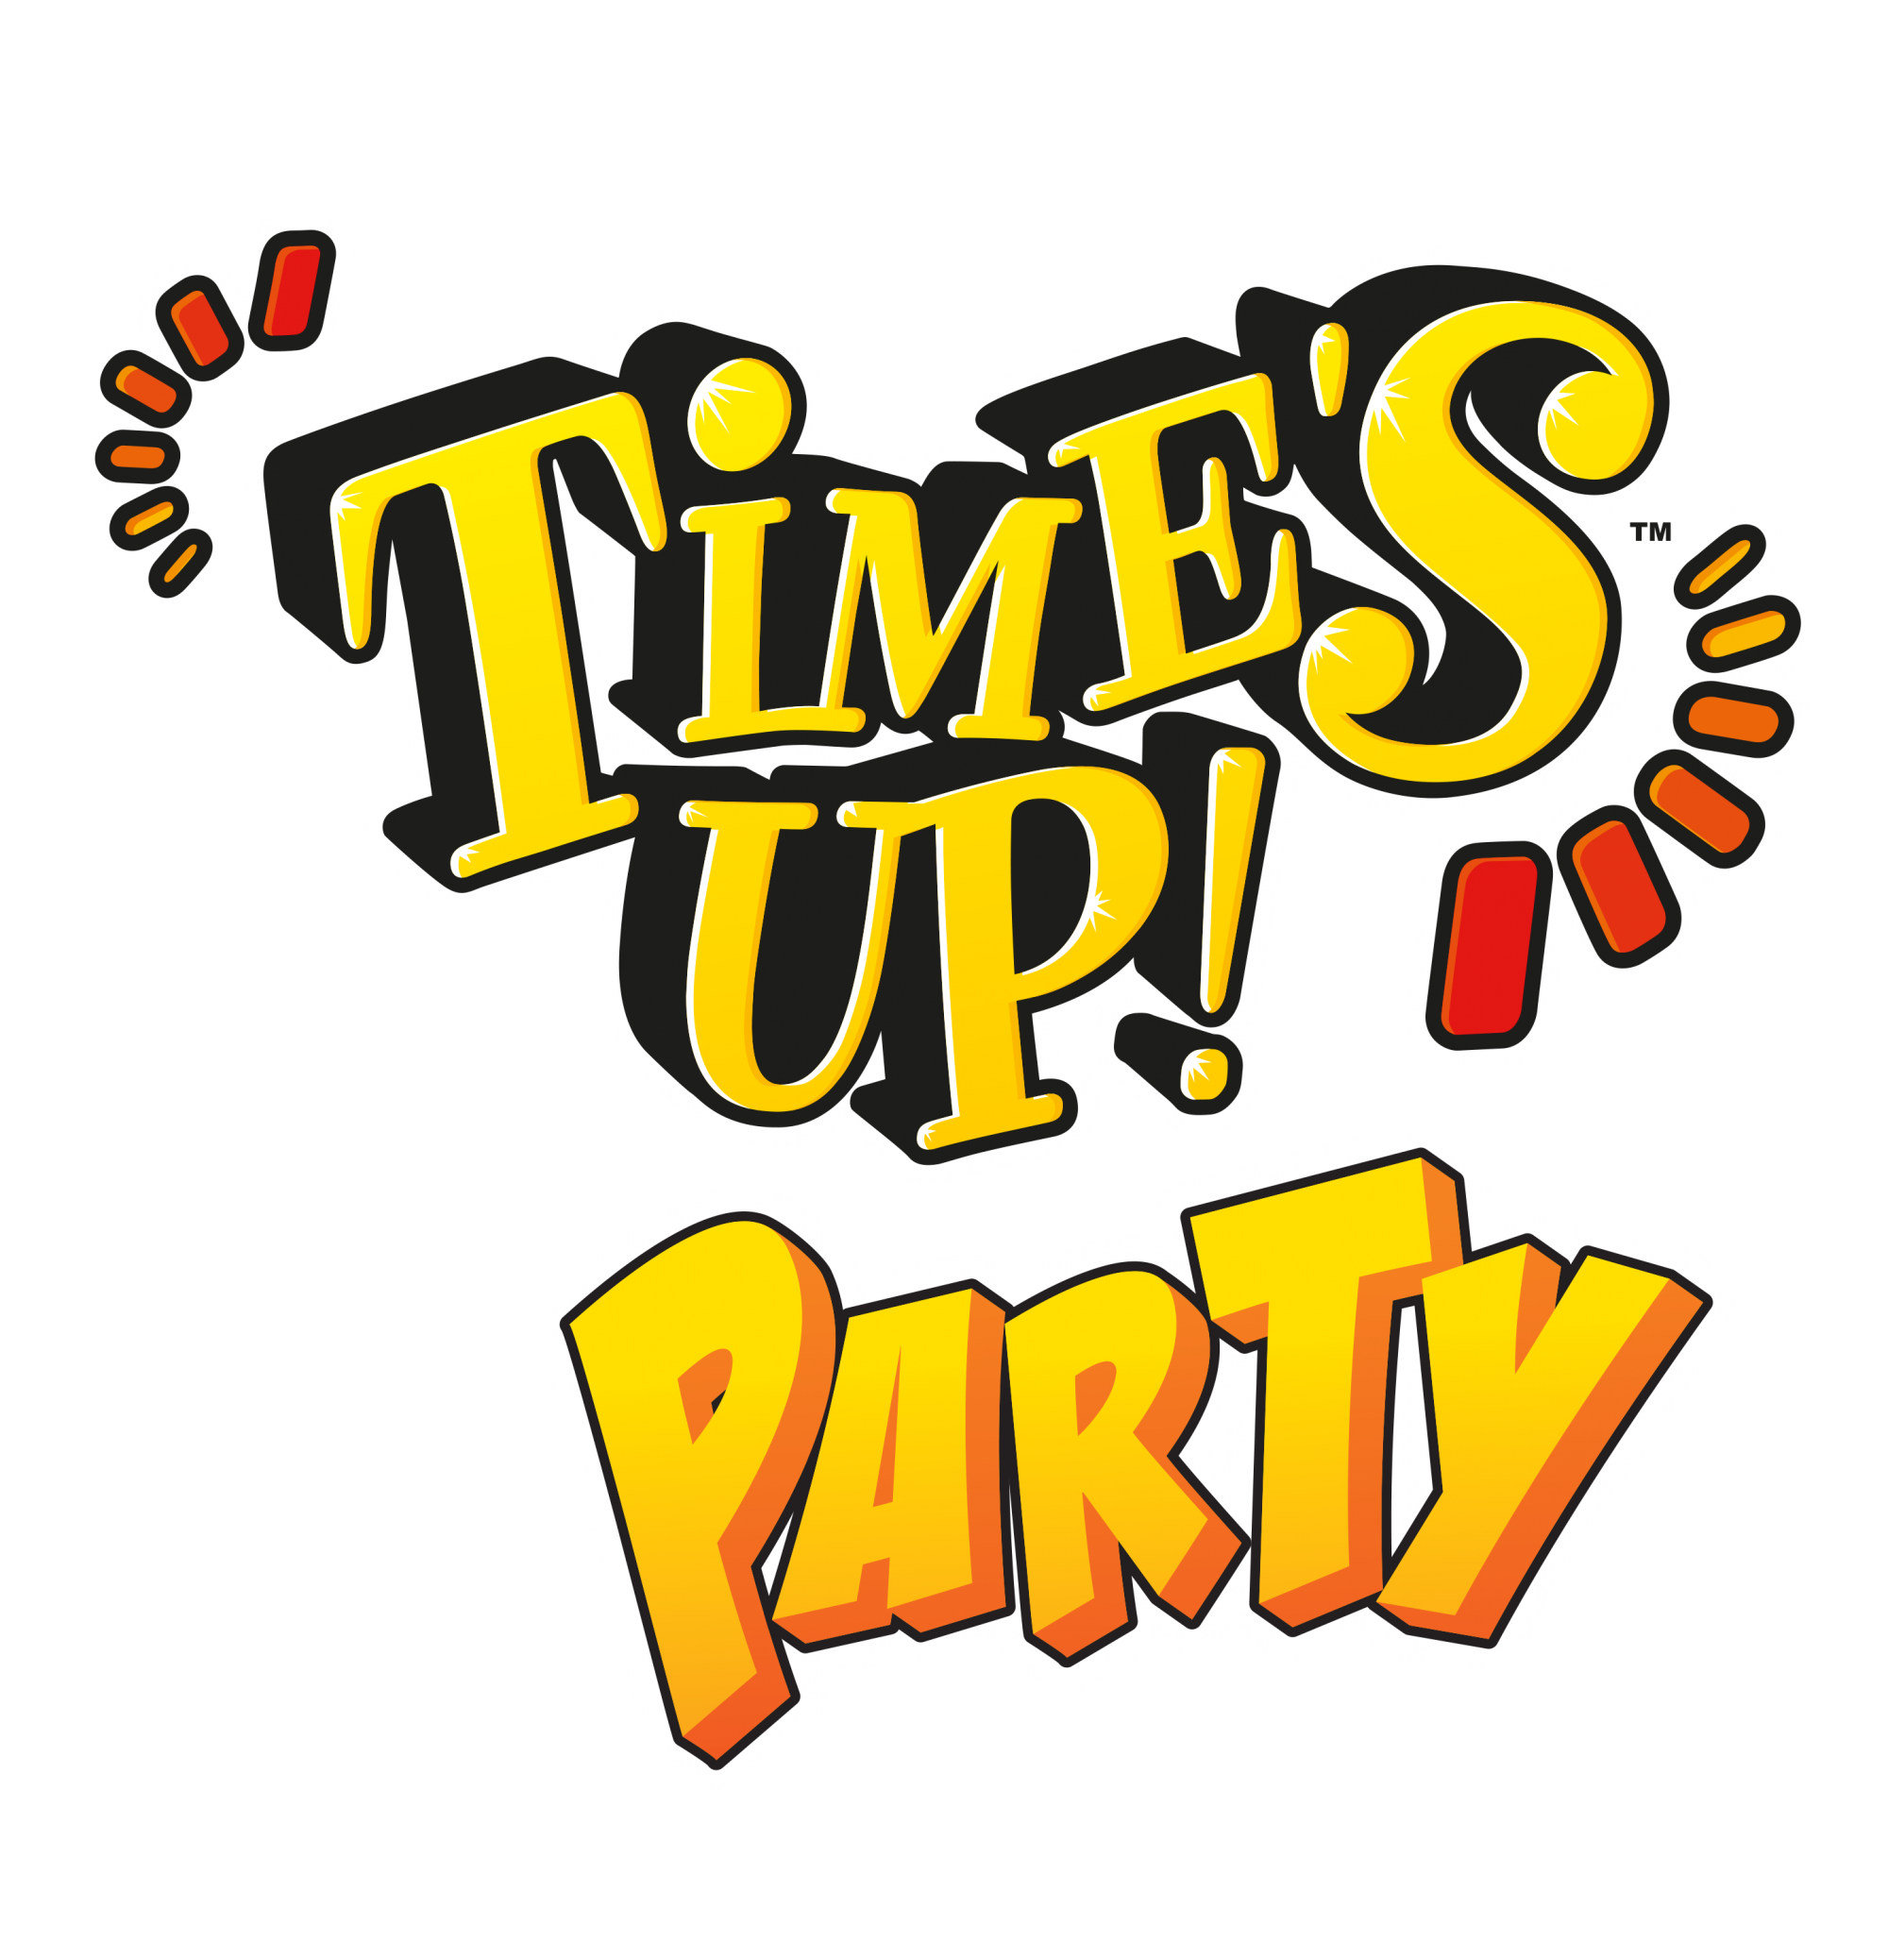 Time's Up!® - Family & Party Game - R&R GAMES